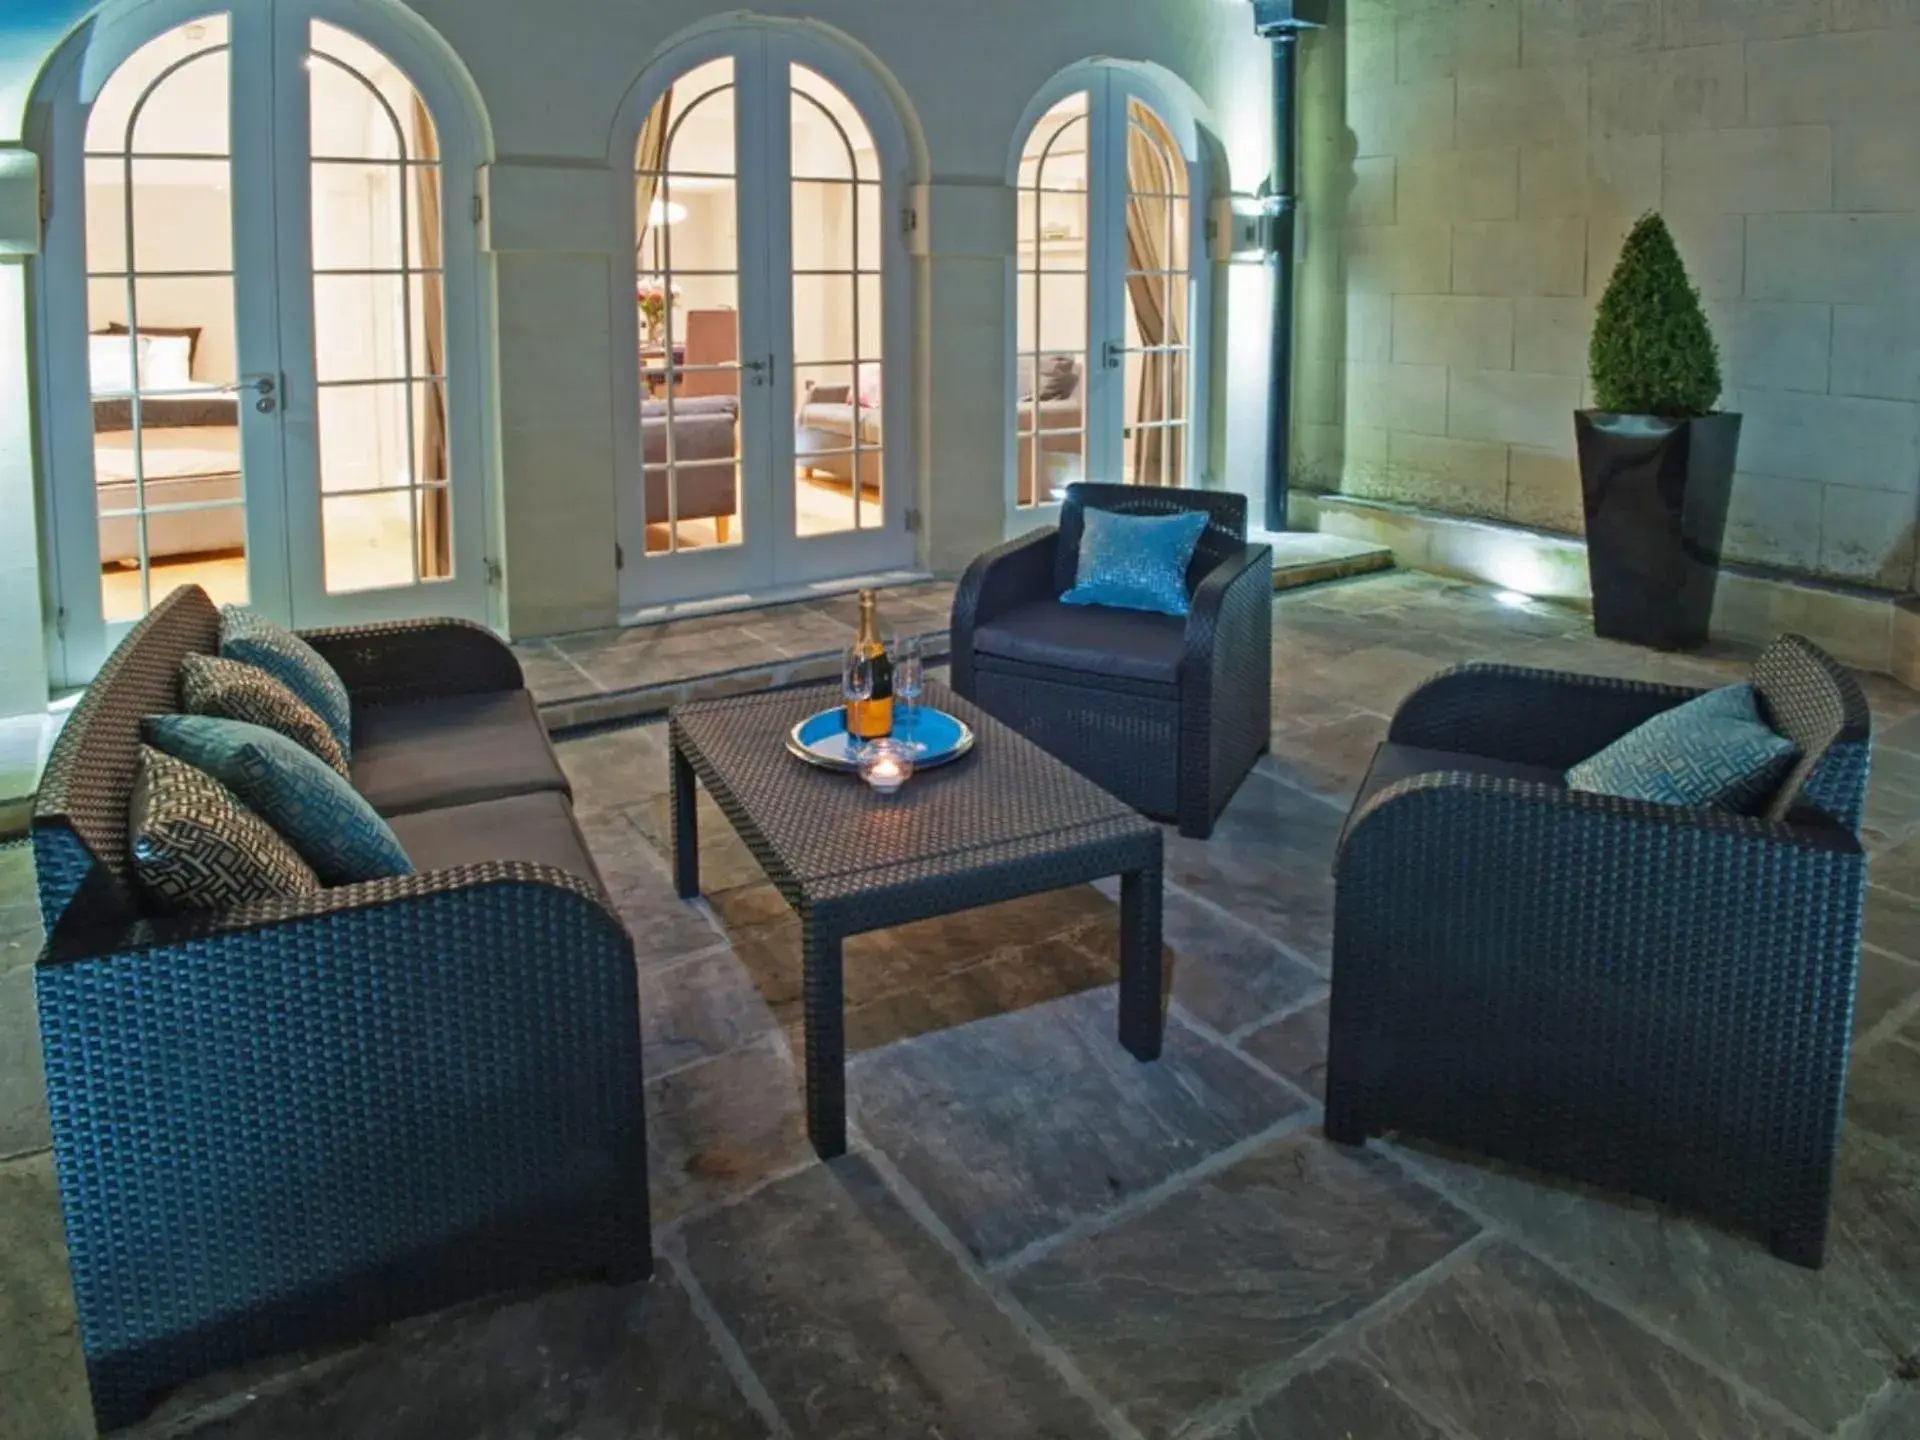 Other, Seating Area in Bath Circle